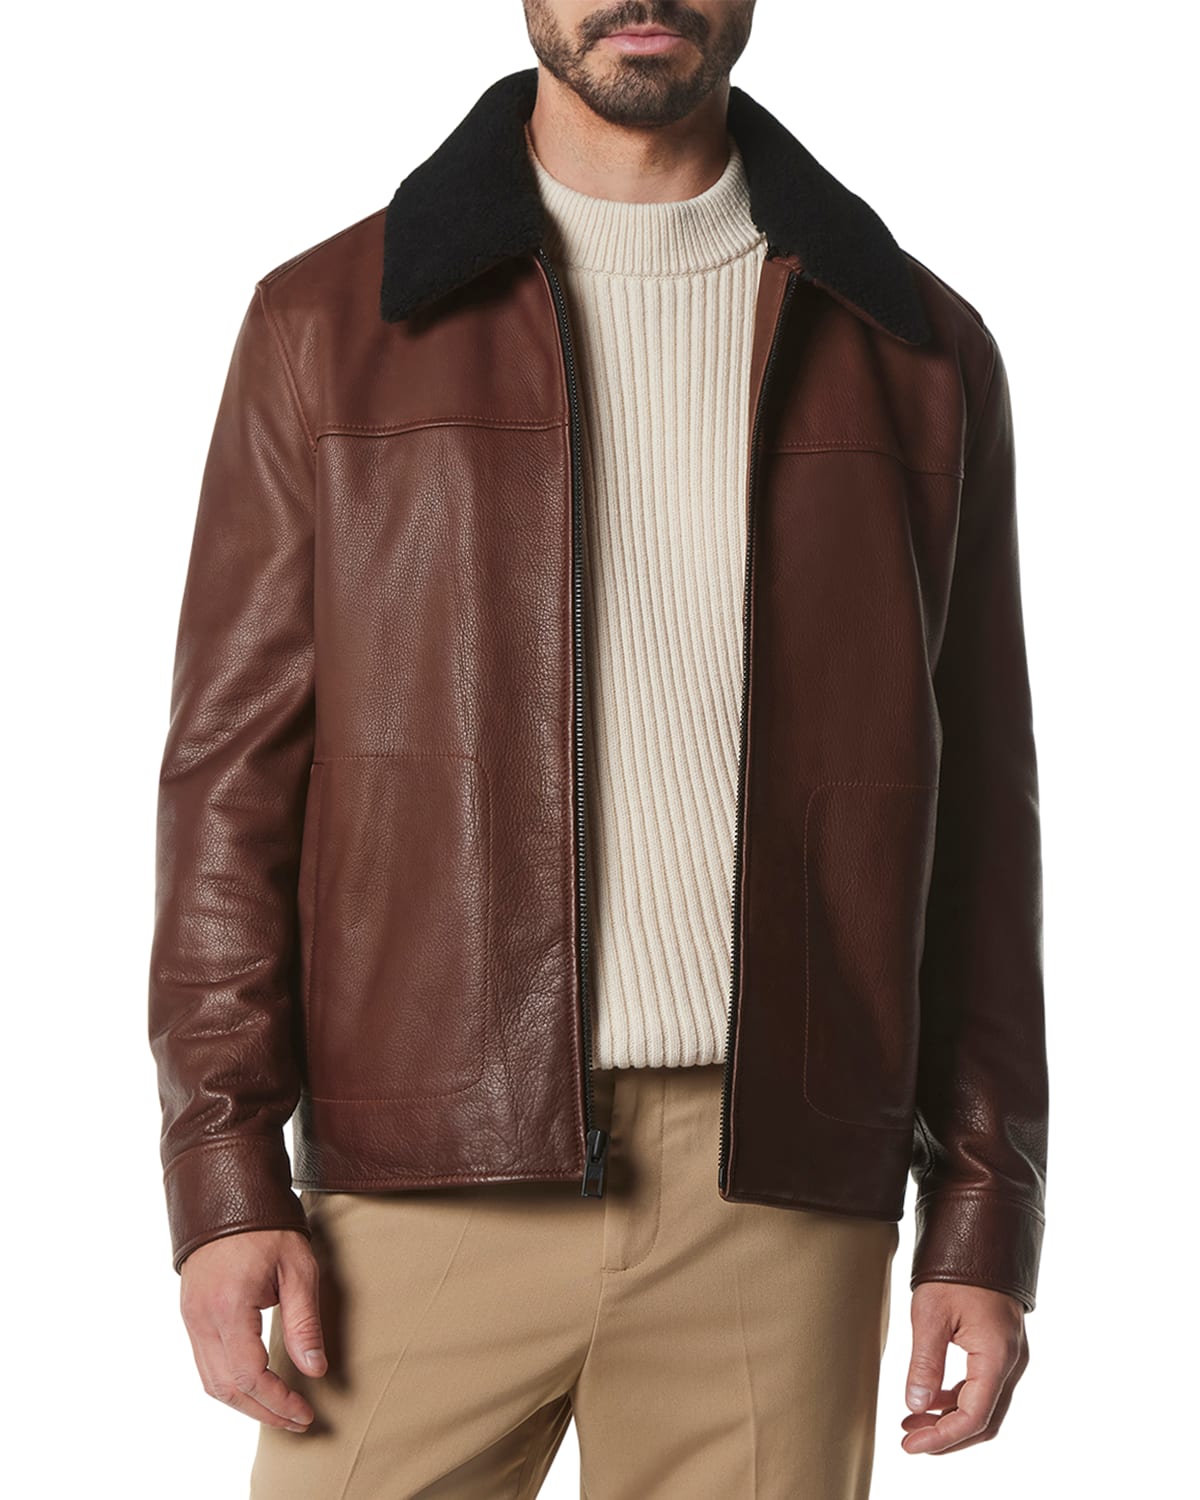 Andrew Marc Men's Truxton Leather/Shearling Jacket